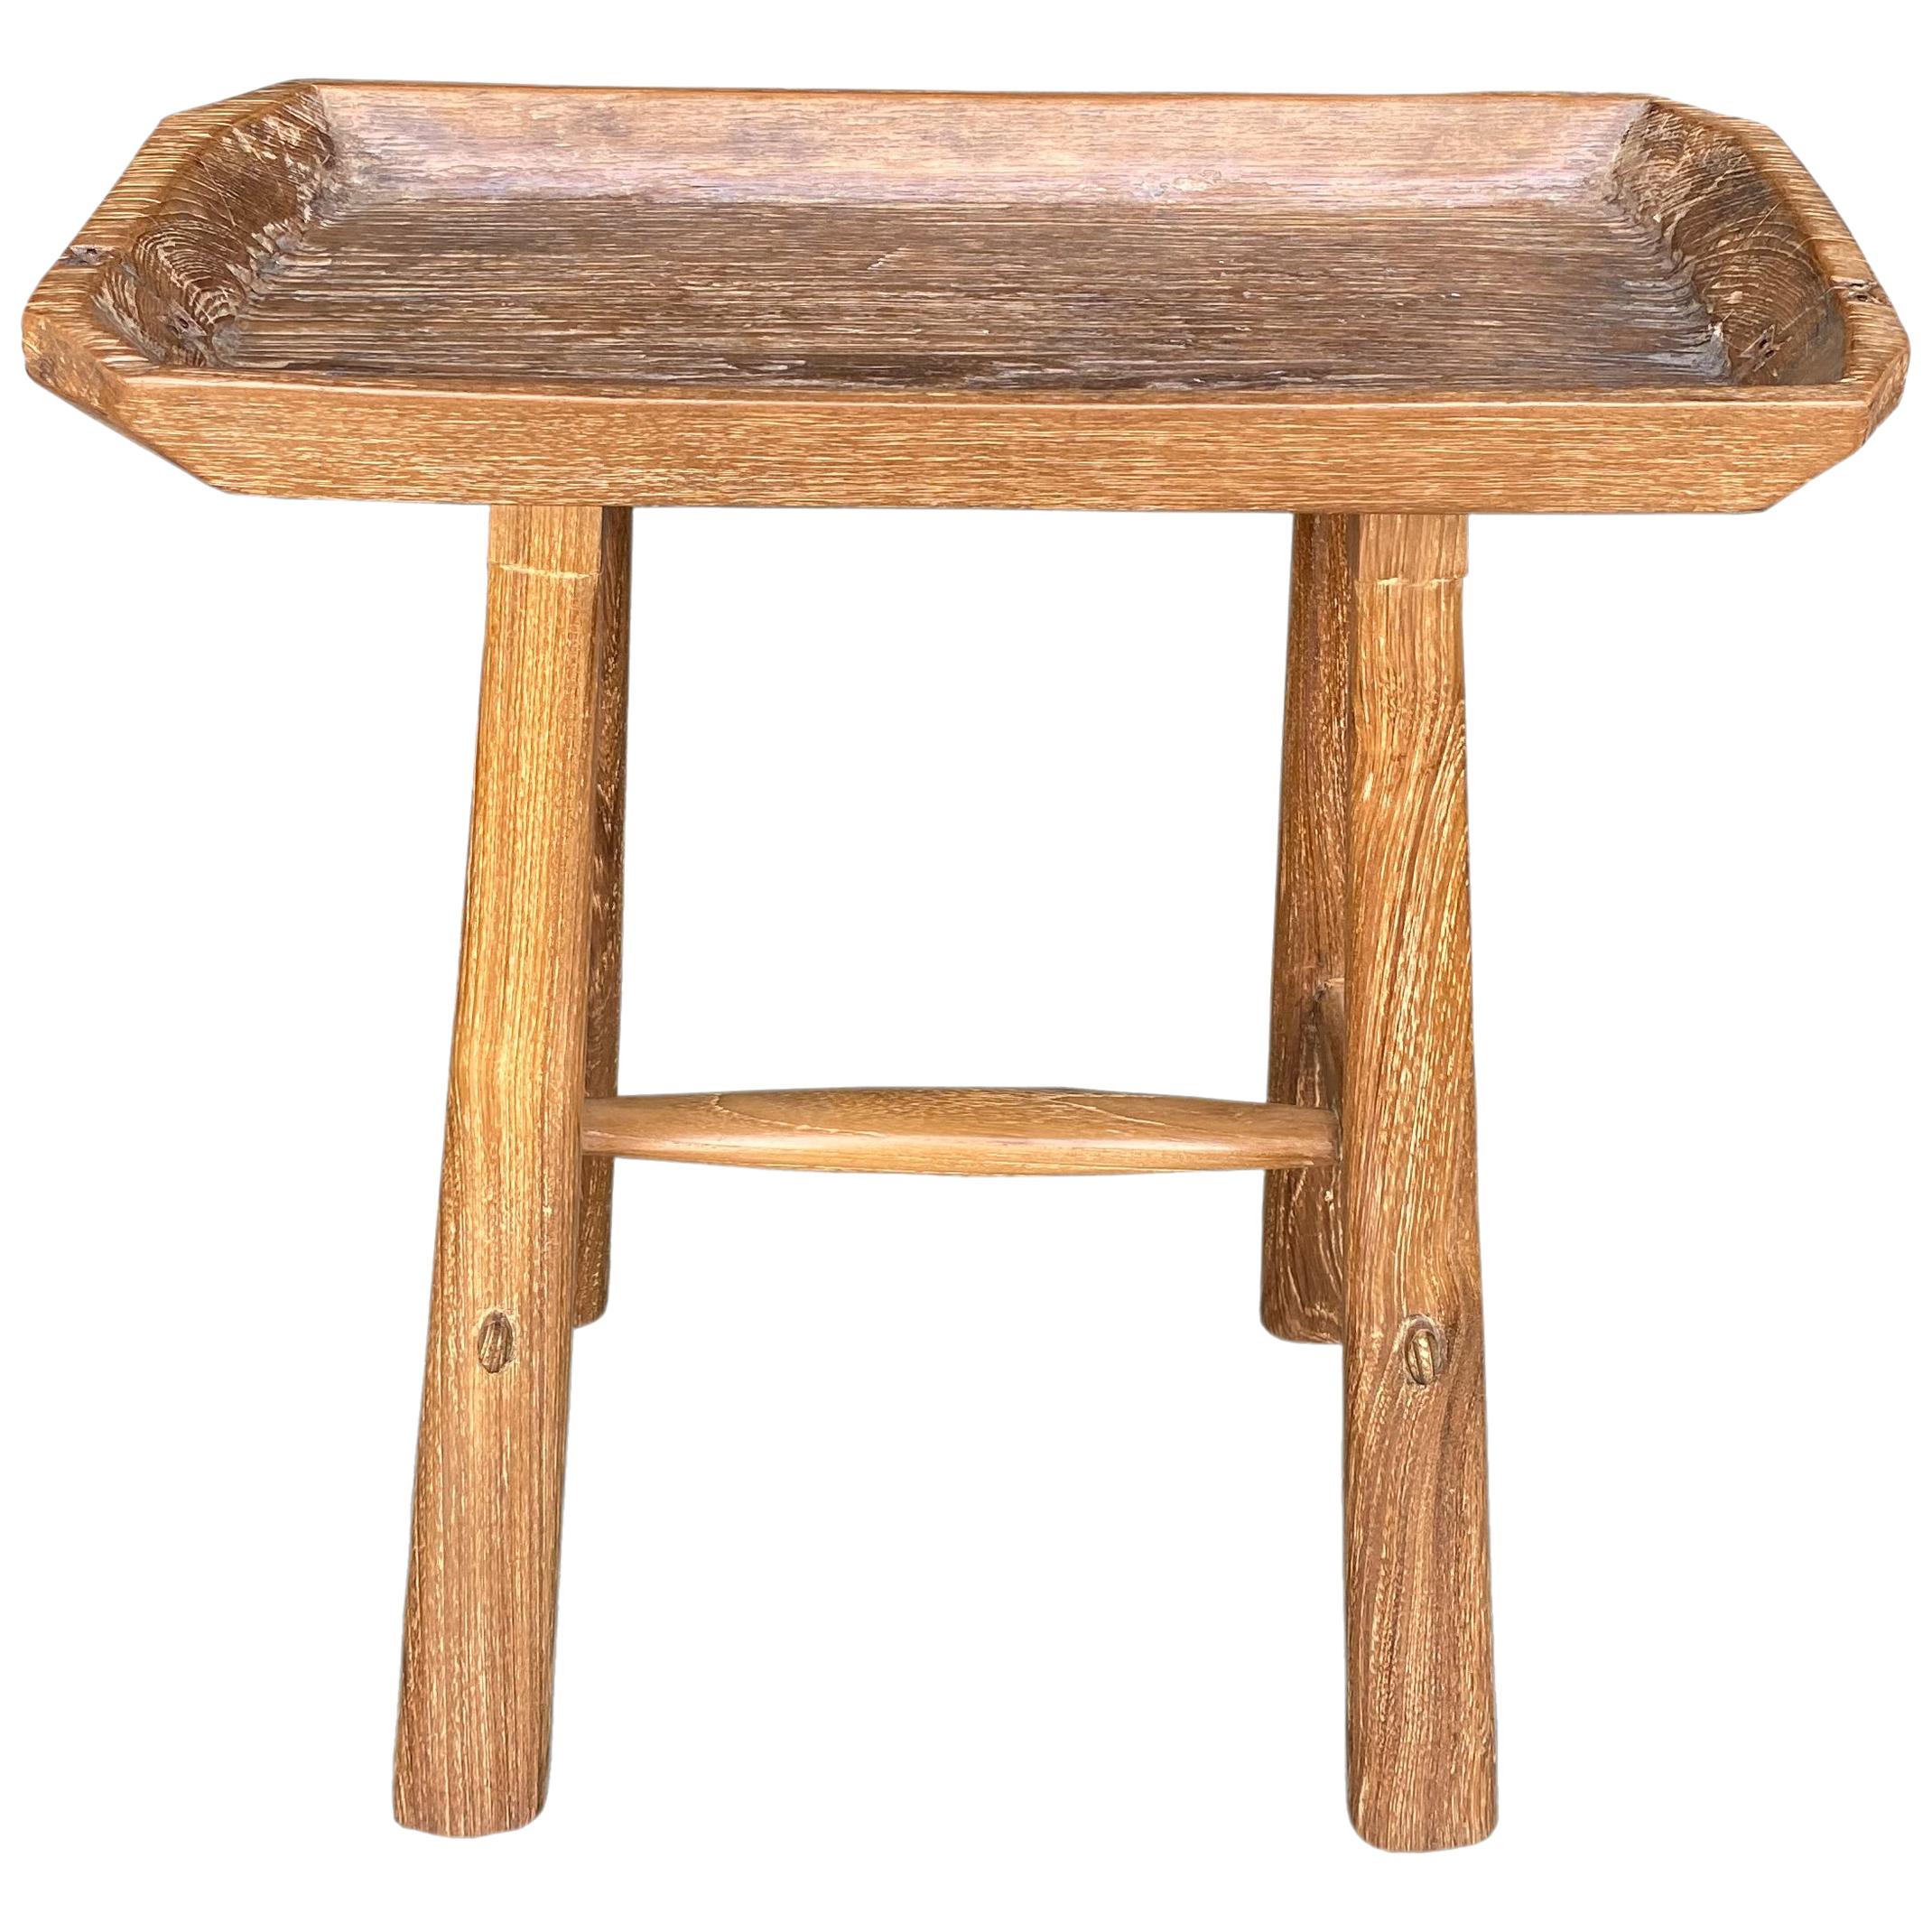 Andrianna Shamaris Midcentury Couture Teak Wood Antique Tray Side Table